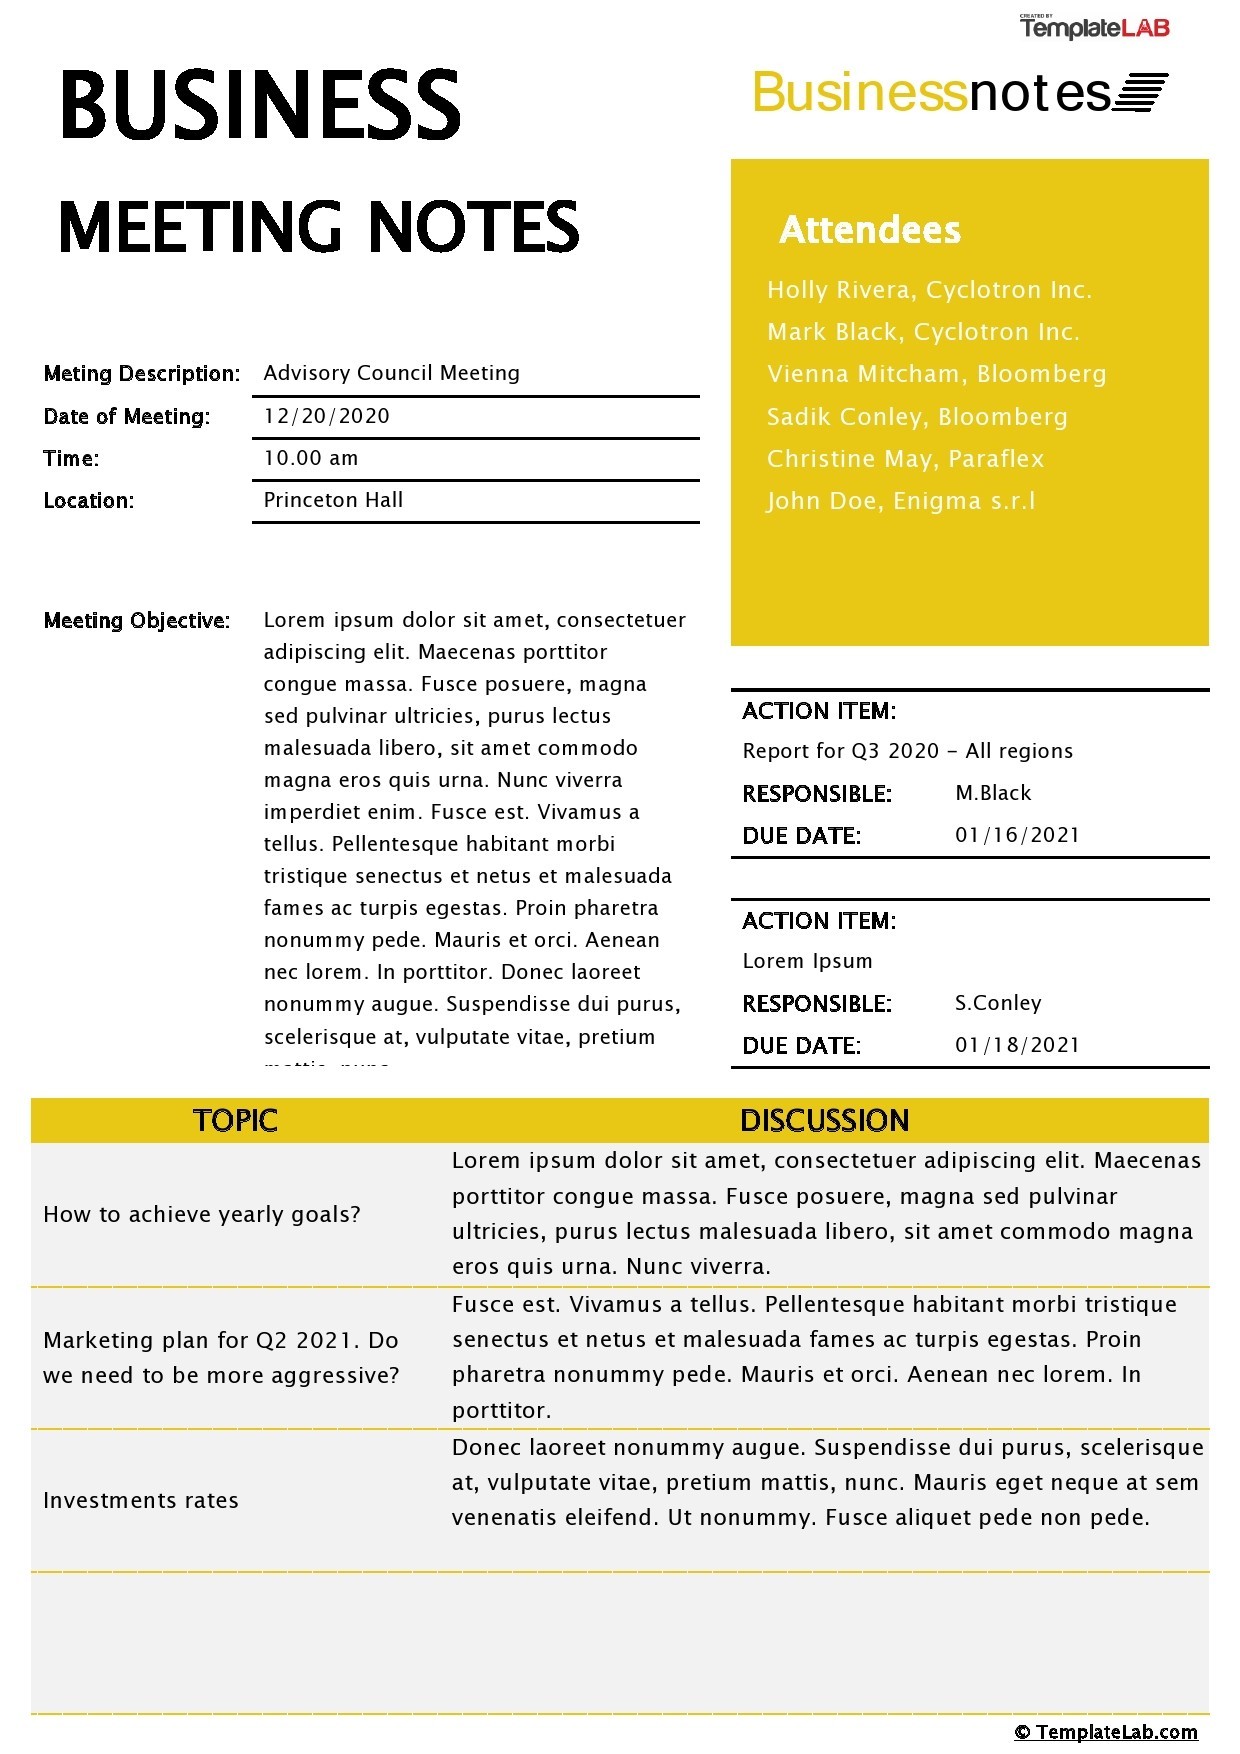 26 Handy Meeting Minutes Meeting Notes Templates